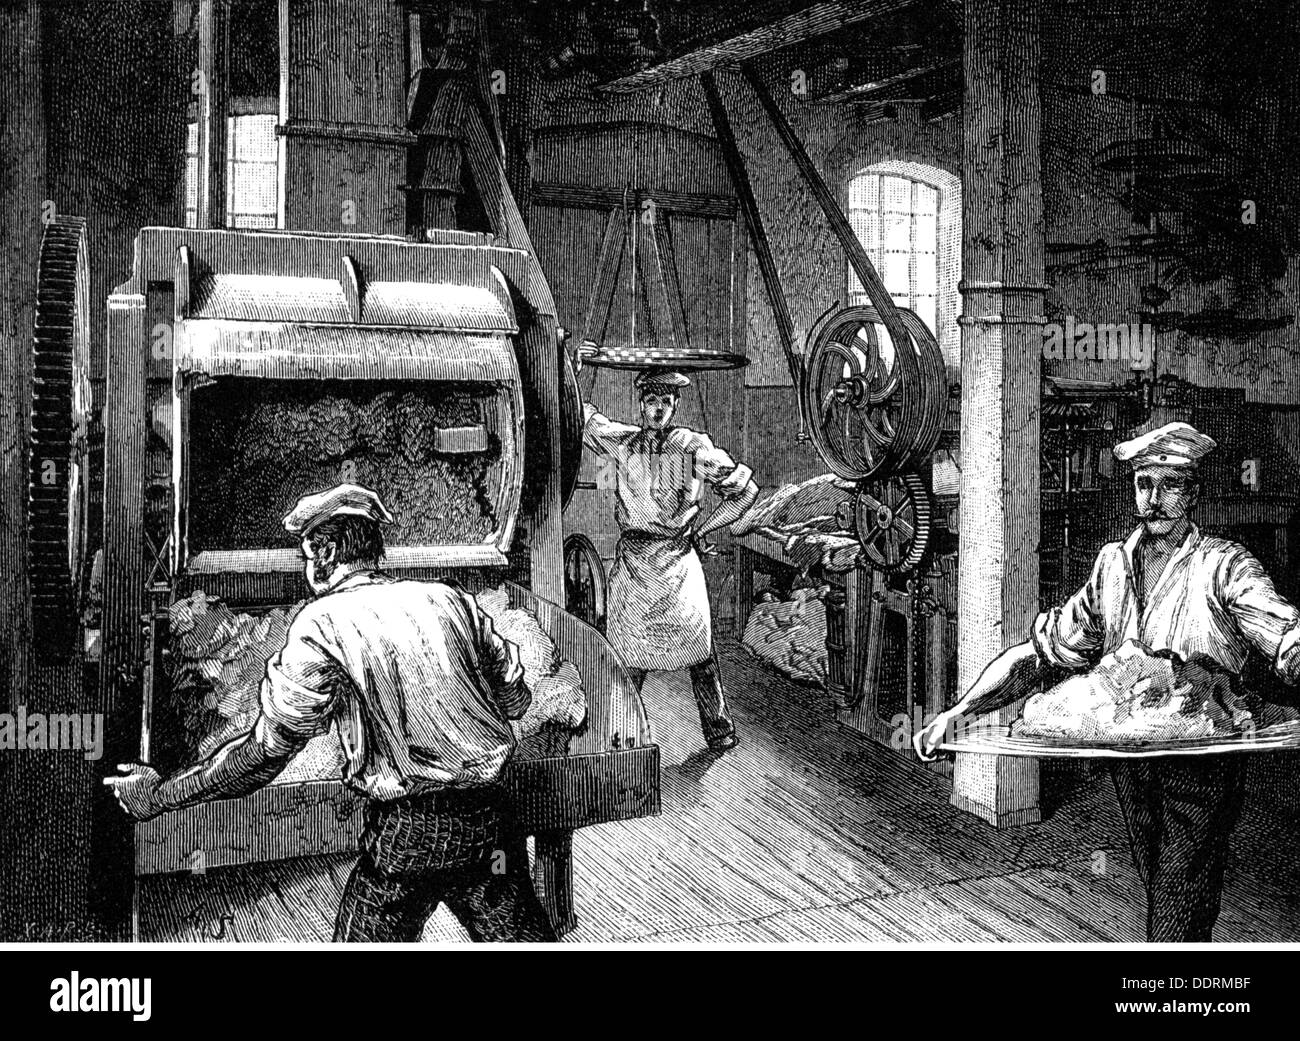 industry, food, sponge, biscuit factory of Langnese, Eppendorf, interior view, dough mixing machine, wood engraving, 1884, Additional-Rights-Clearences-Not Available Stock Photo